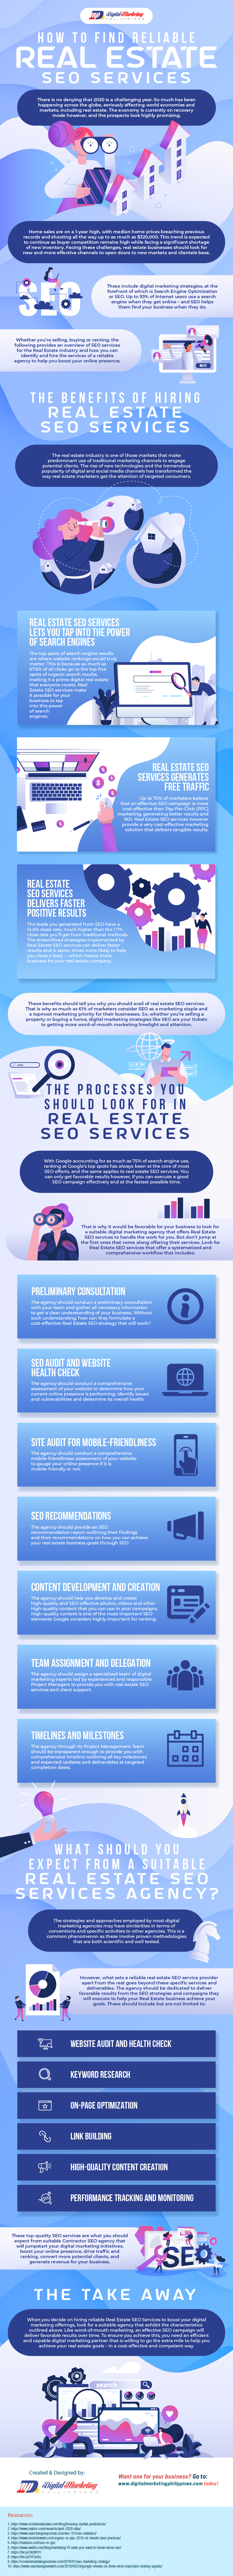 Real Estate SEO services infographic